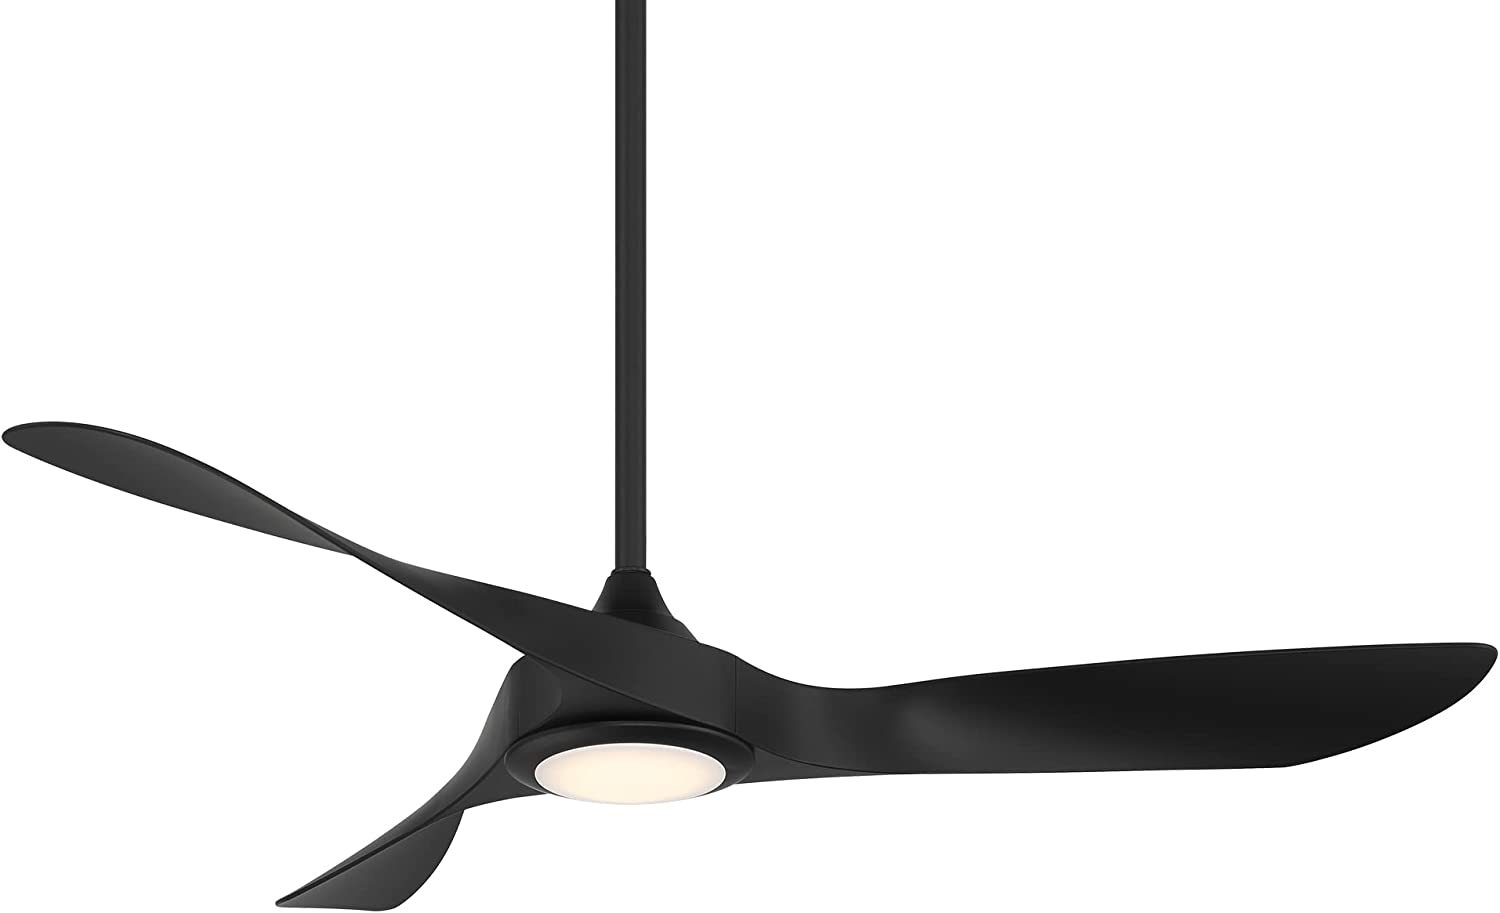 Primary image for Wac Smart Fans Swirl Indoor And Outdoor 3-Blade Ceiling Fan 54In Matte Black